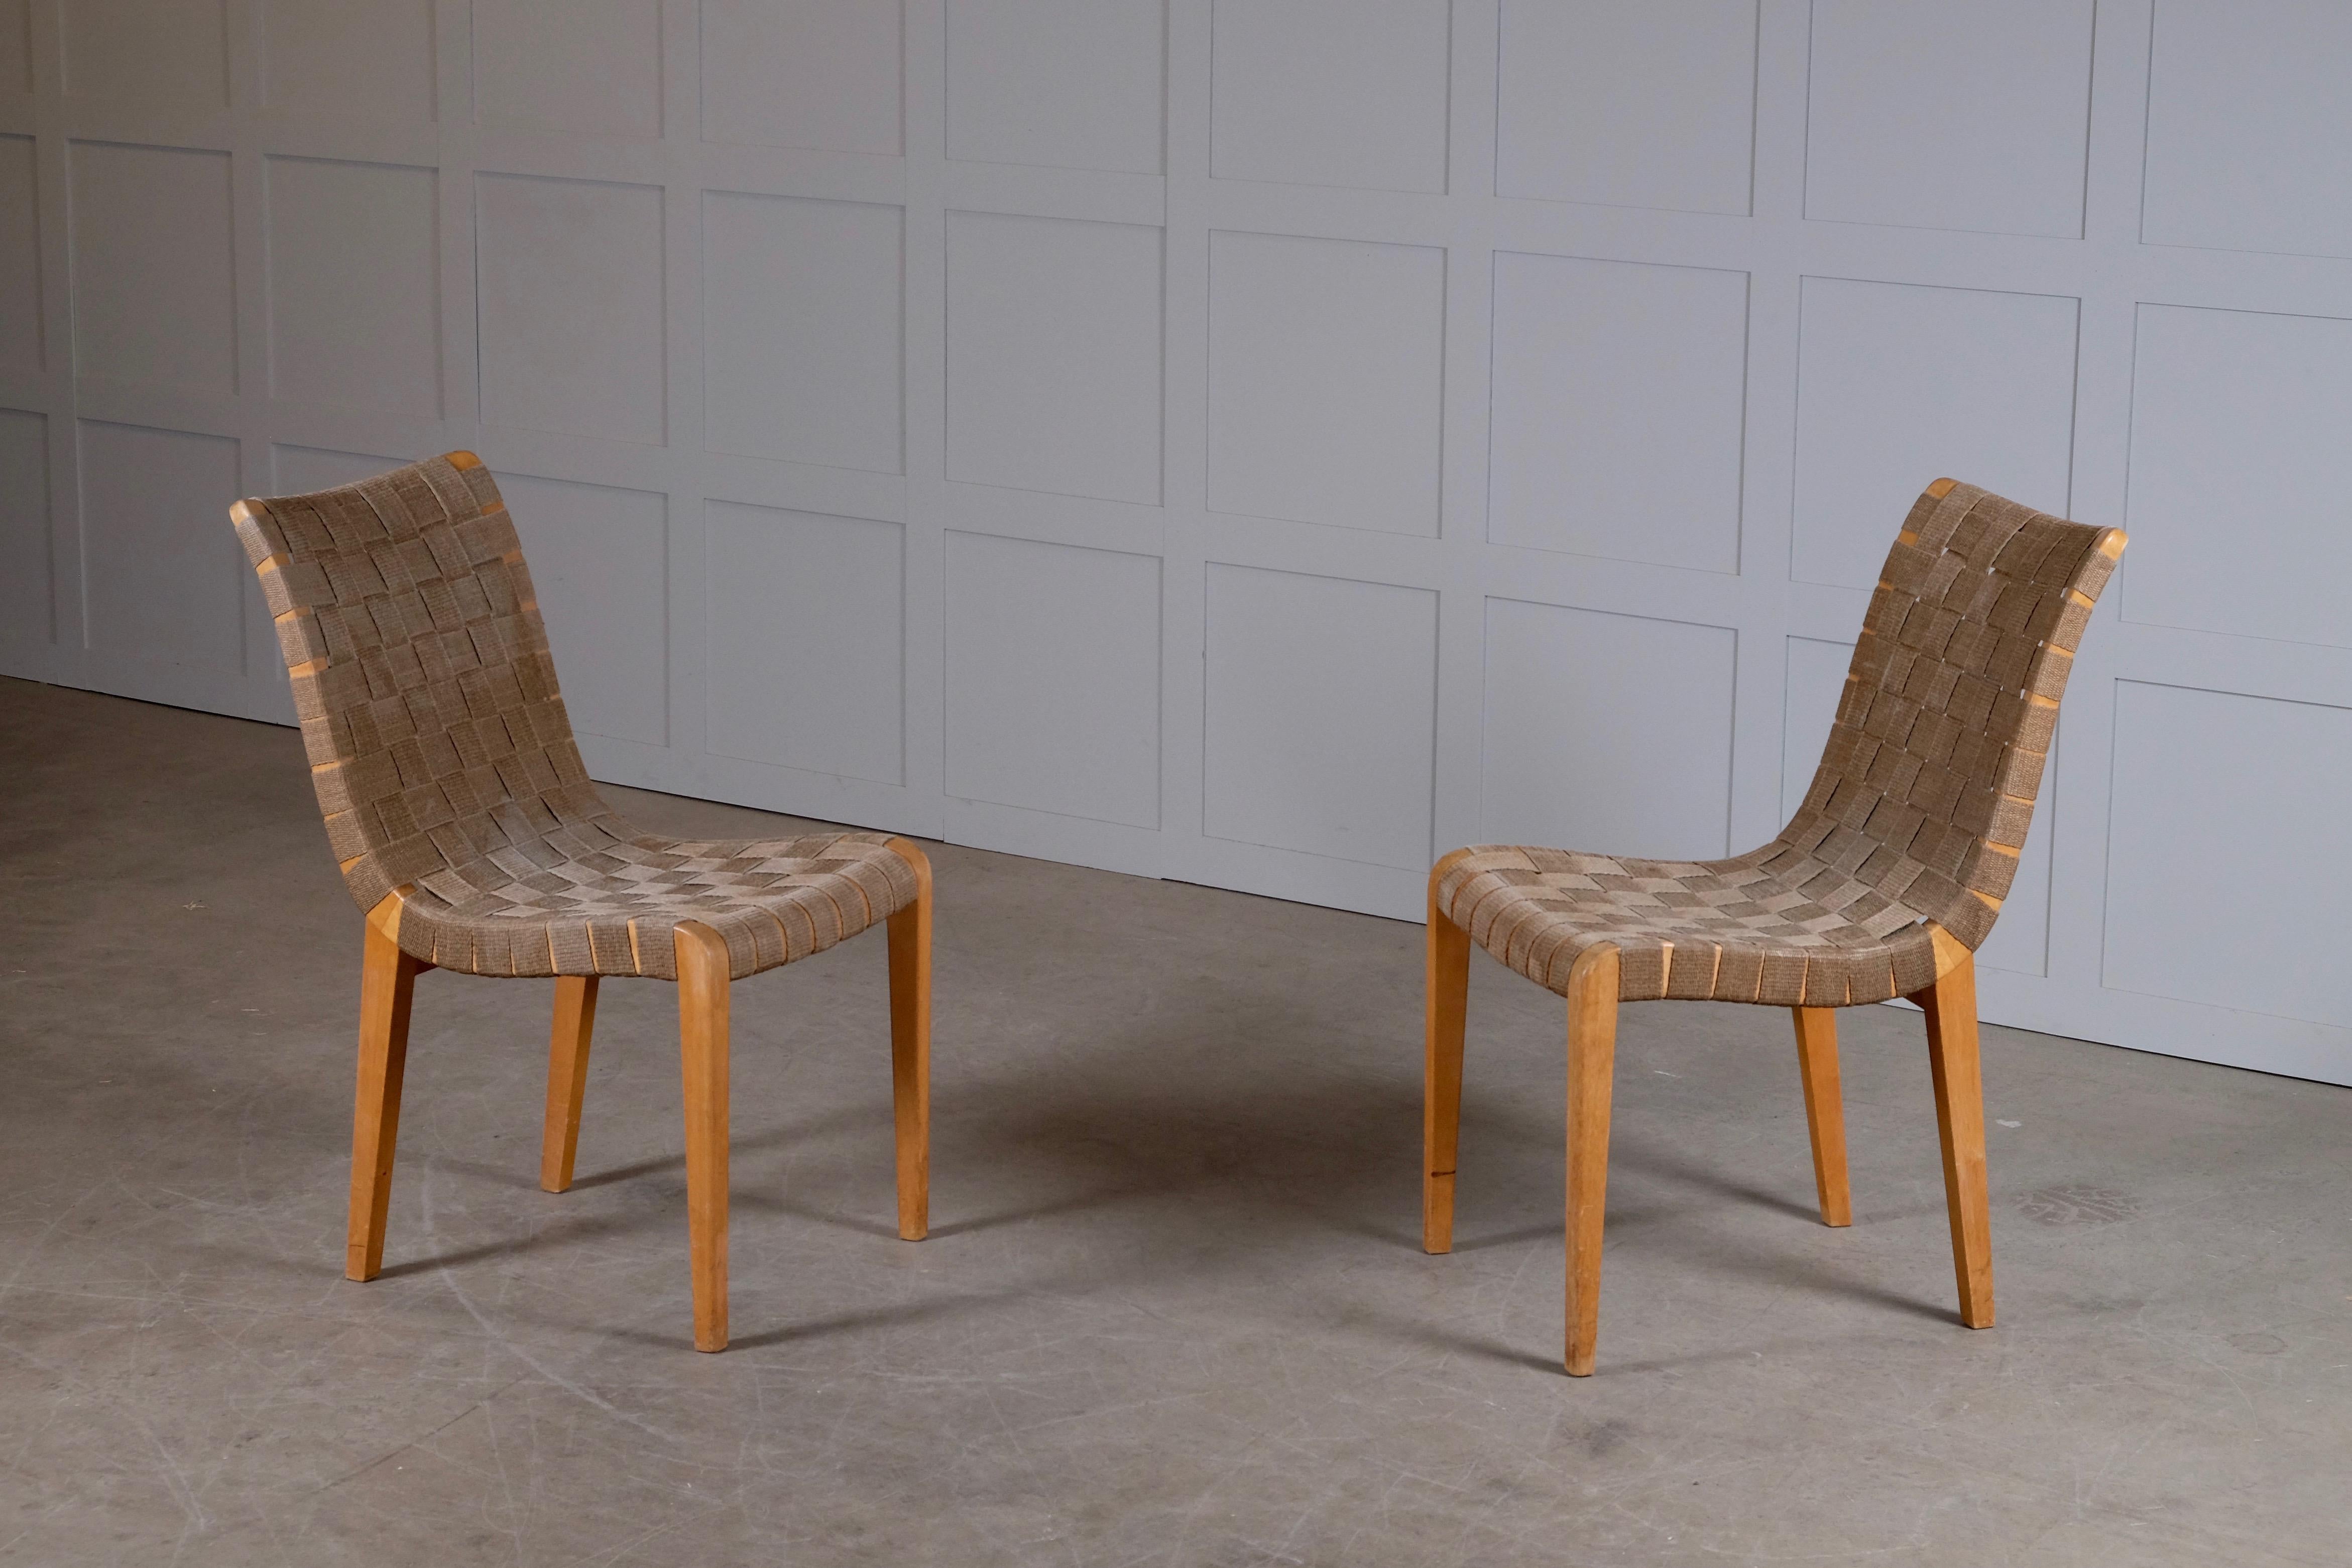 Pair of Axel Larsson Chairs by Bodafors, 1940s For Sale 5